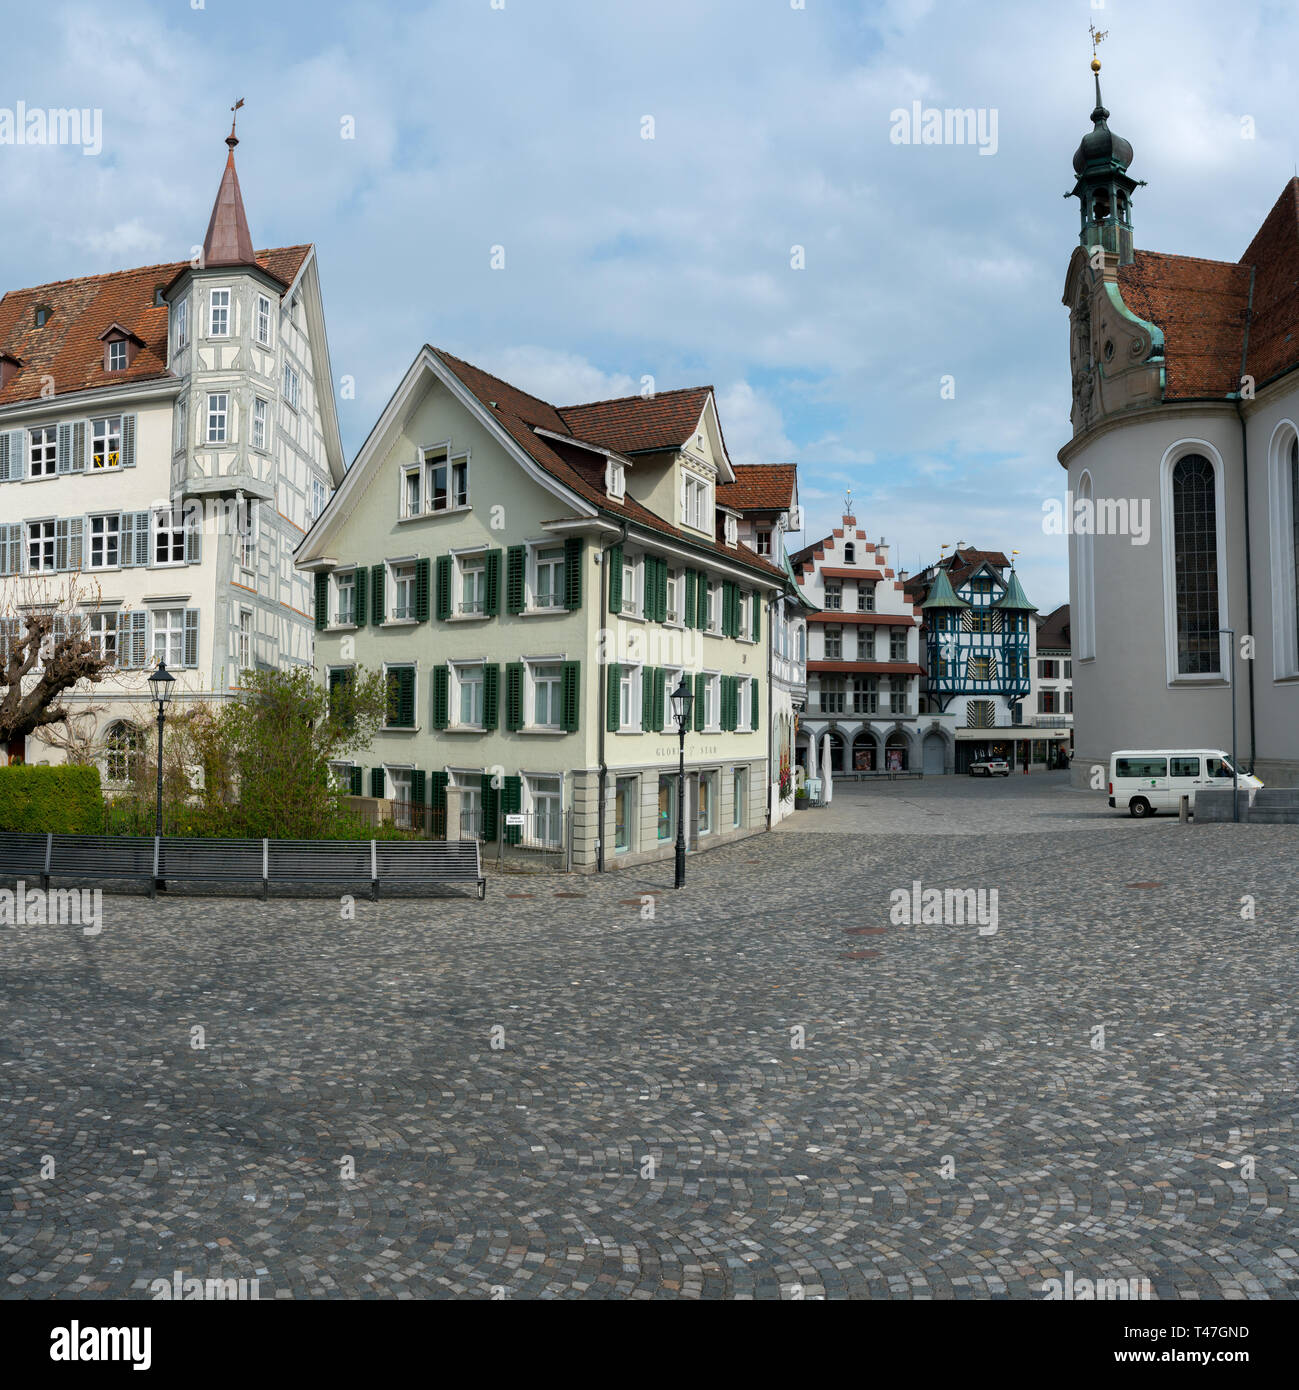 St. Gallen, SG / Switzerland - April 8, 2019: the view from the historic St. Gallus Square in the Swiss city of Sankt Gallen Stock Photo